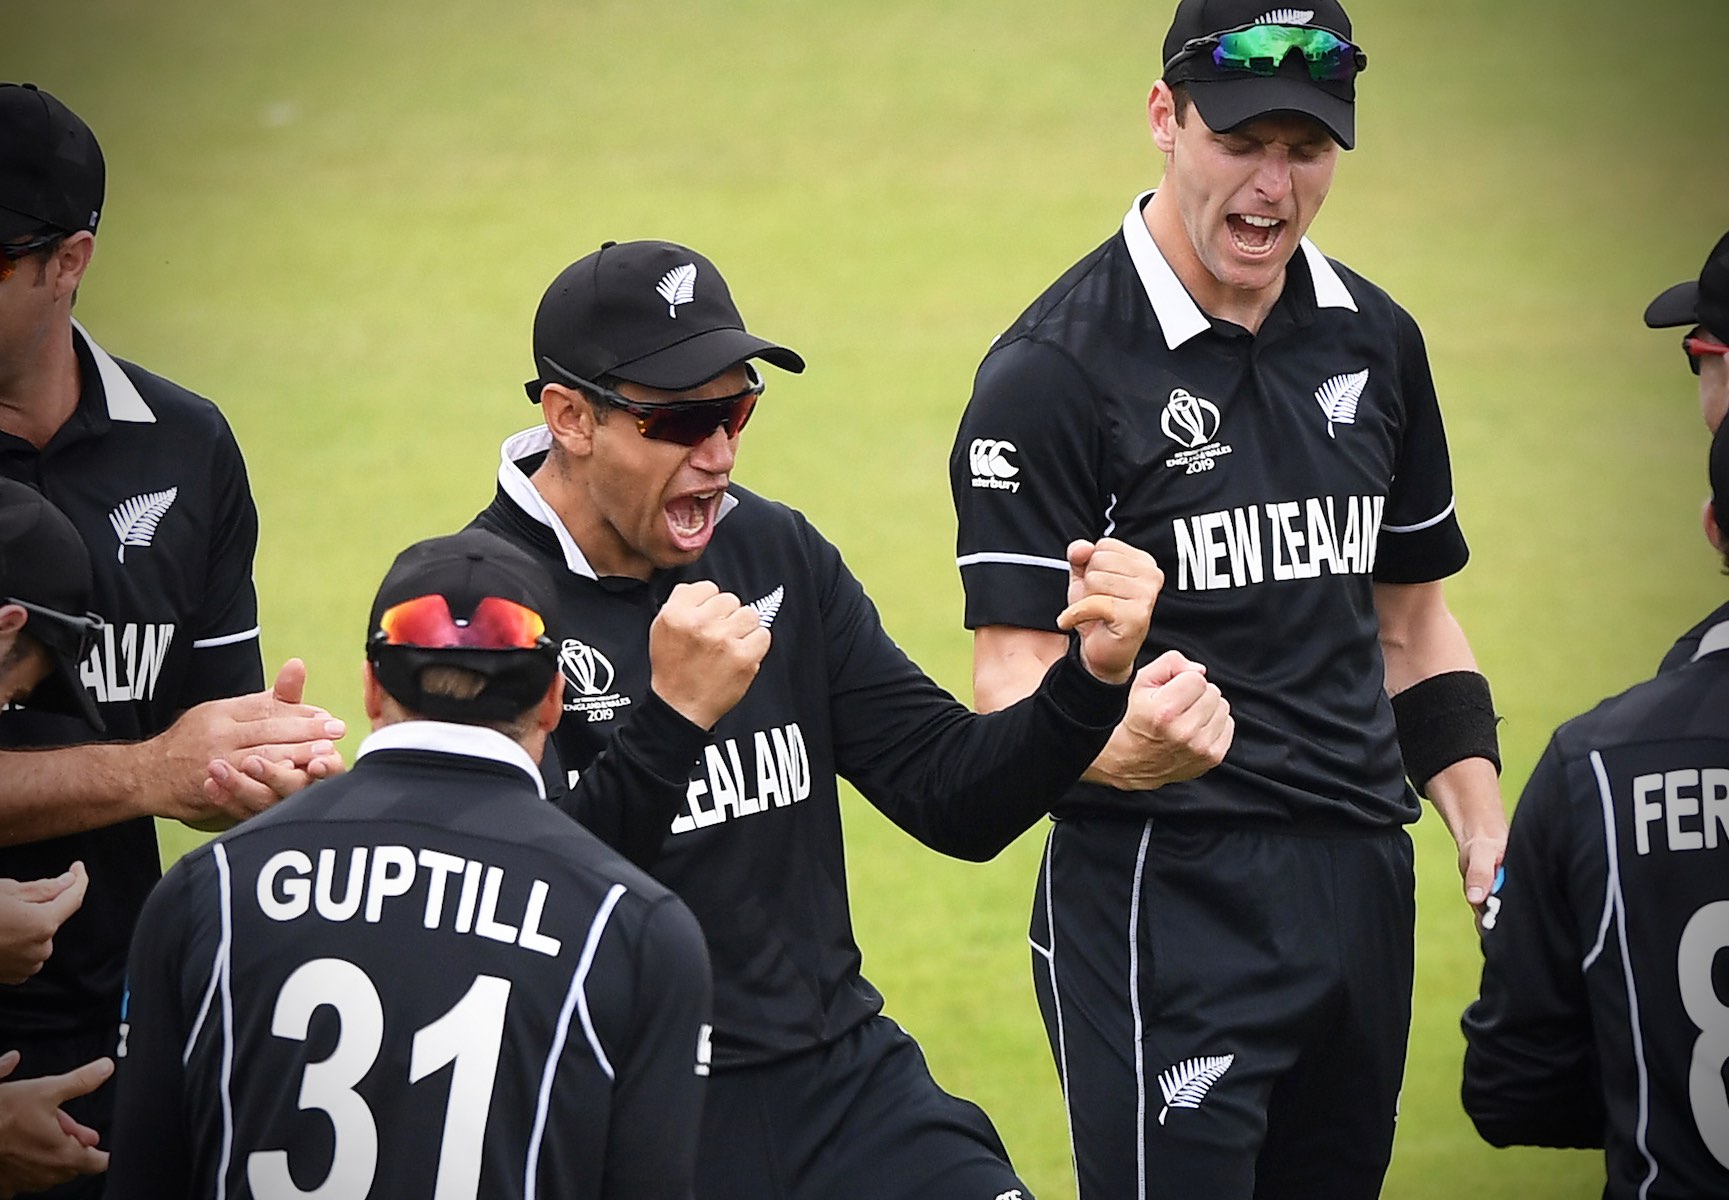 Ross Taylor and NZ players celebrate the wicket of Kohli after a review.
New Zealand Black Caps v India. ICC Cricket World Cup semi final match. Old Trafford Cricket ground, Manchester UK. Wednesday 10 July 2019. © Copyright Photo: Andrew Cornaga / www.photosport.nz